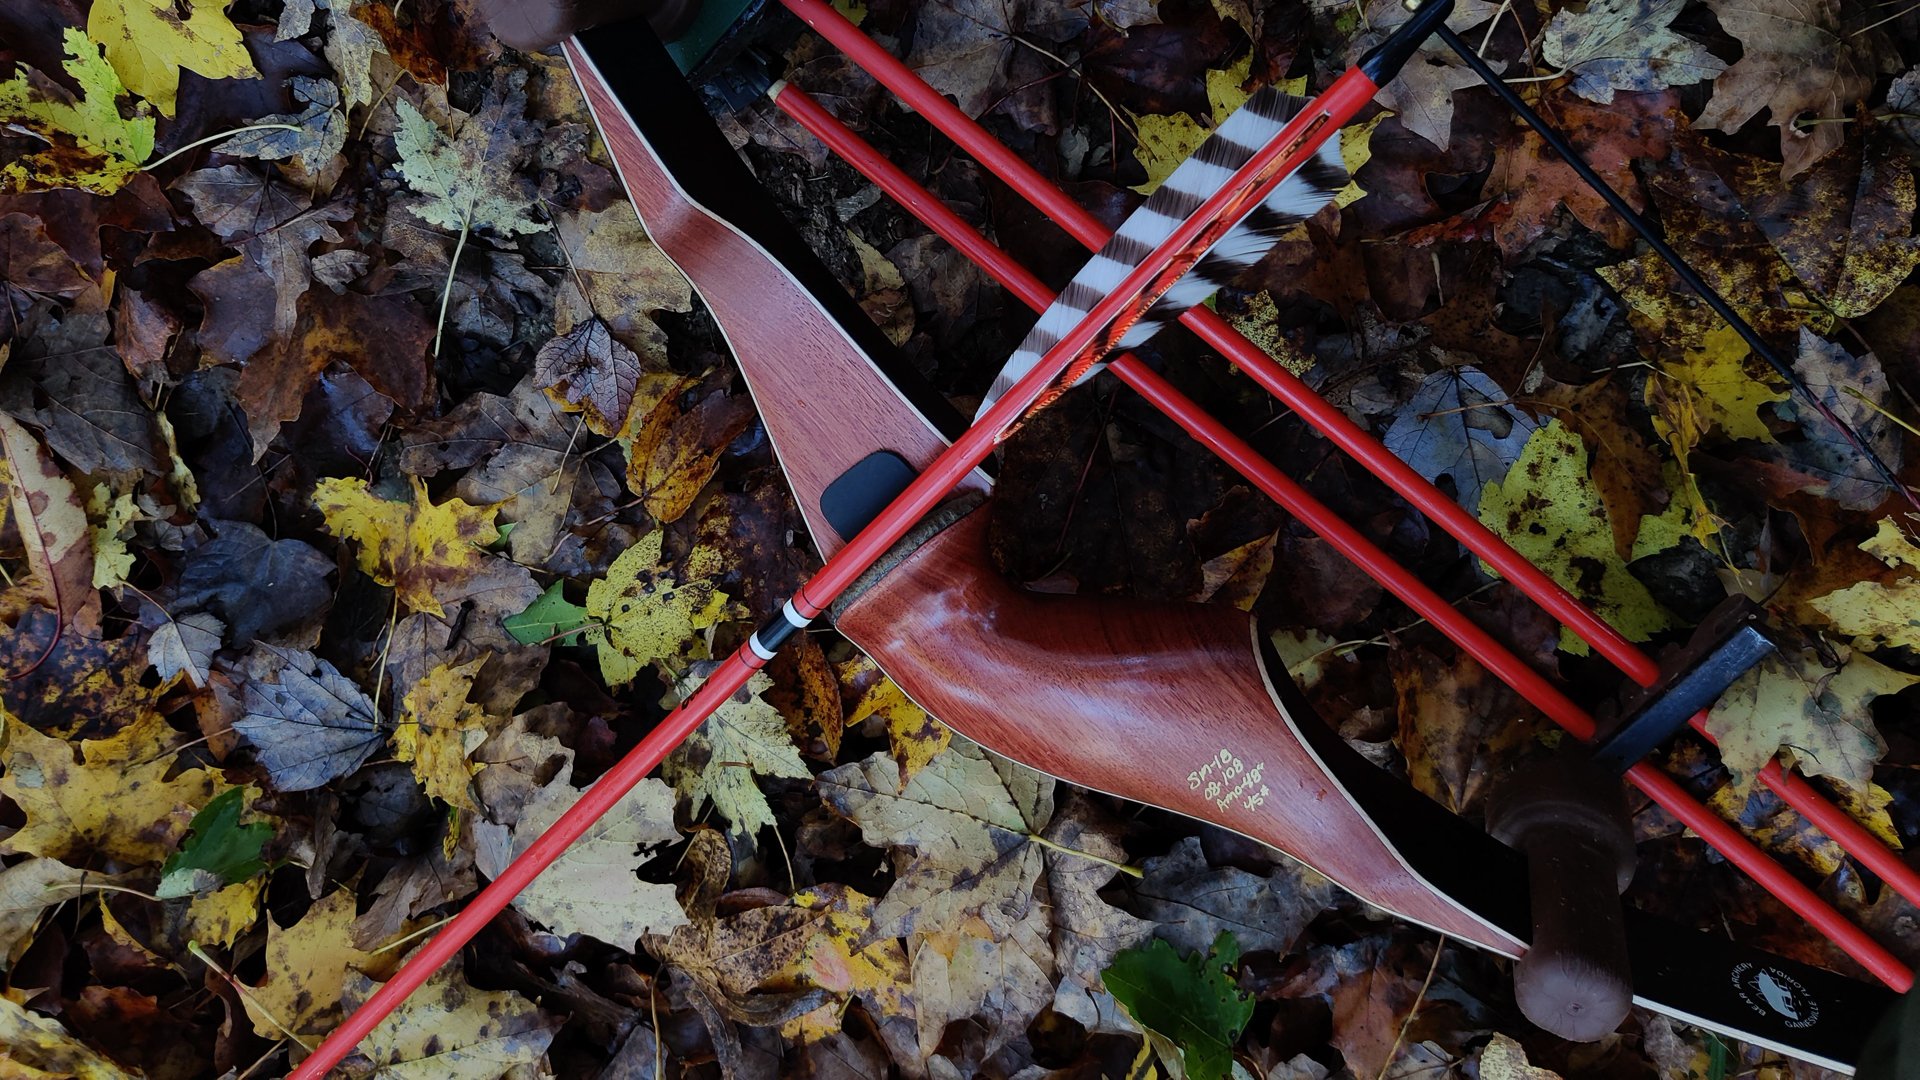 The Best Underrated Traditional Bows To Consider This Year